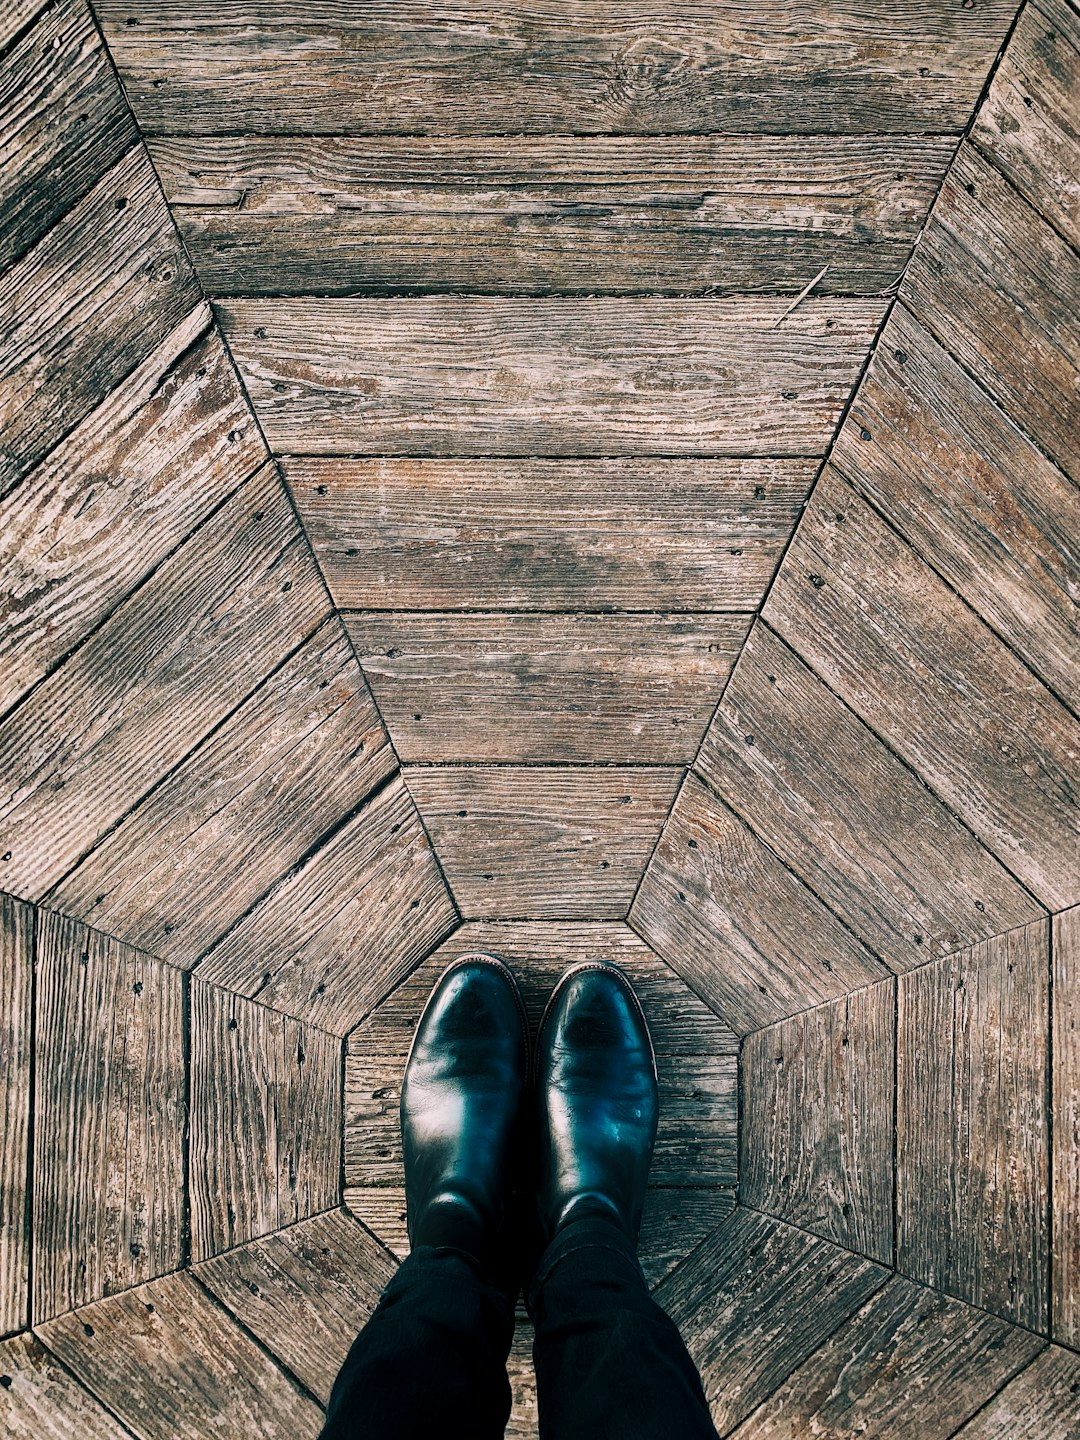 person wearing black leather shoes standing on wooden floor